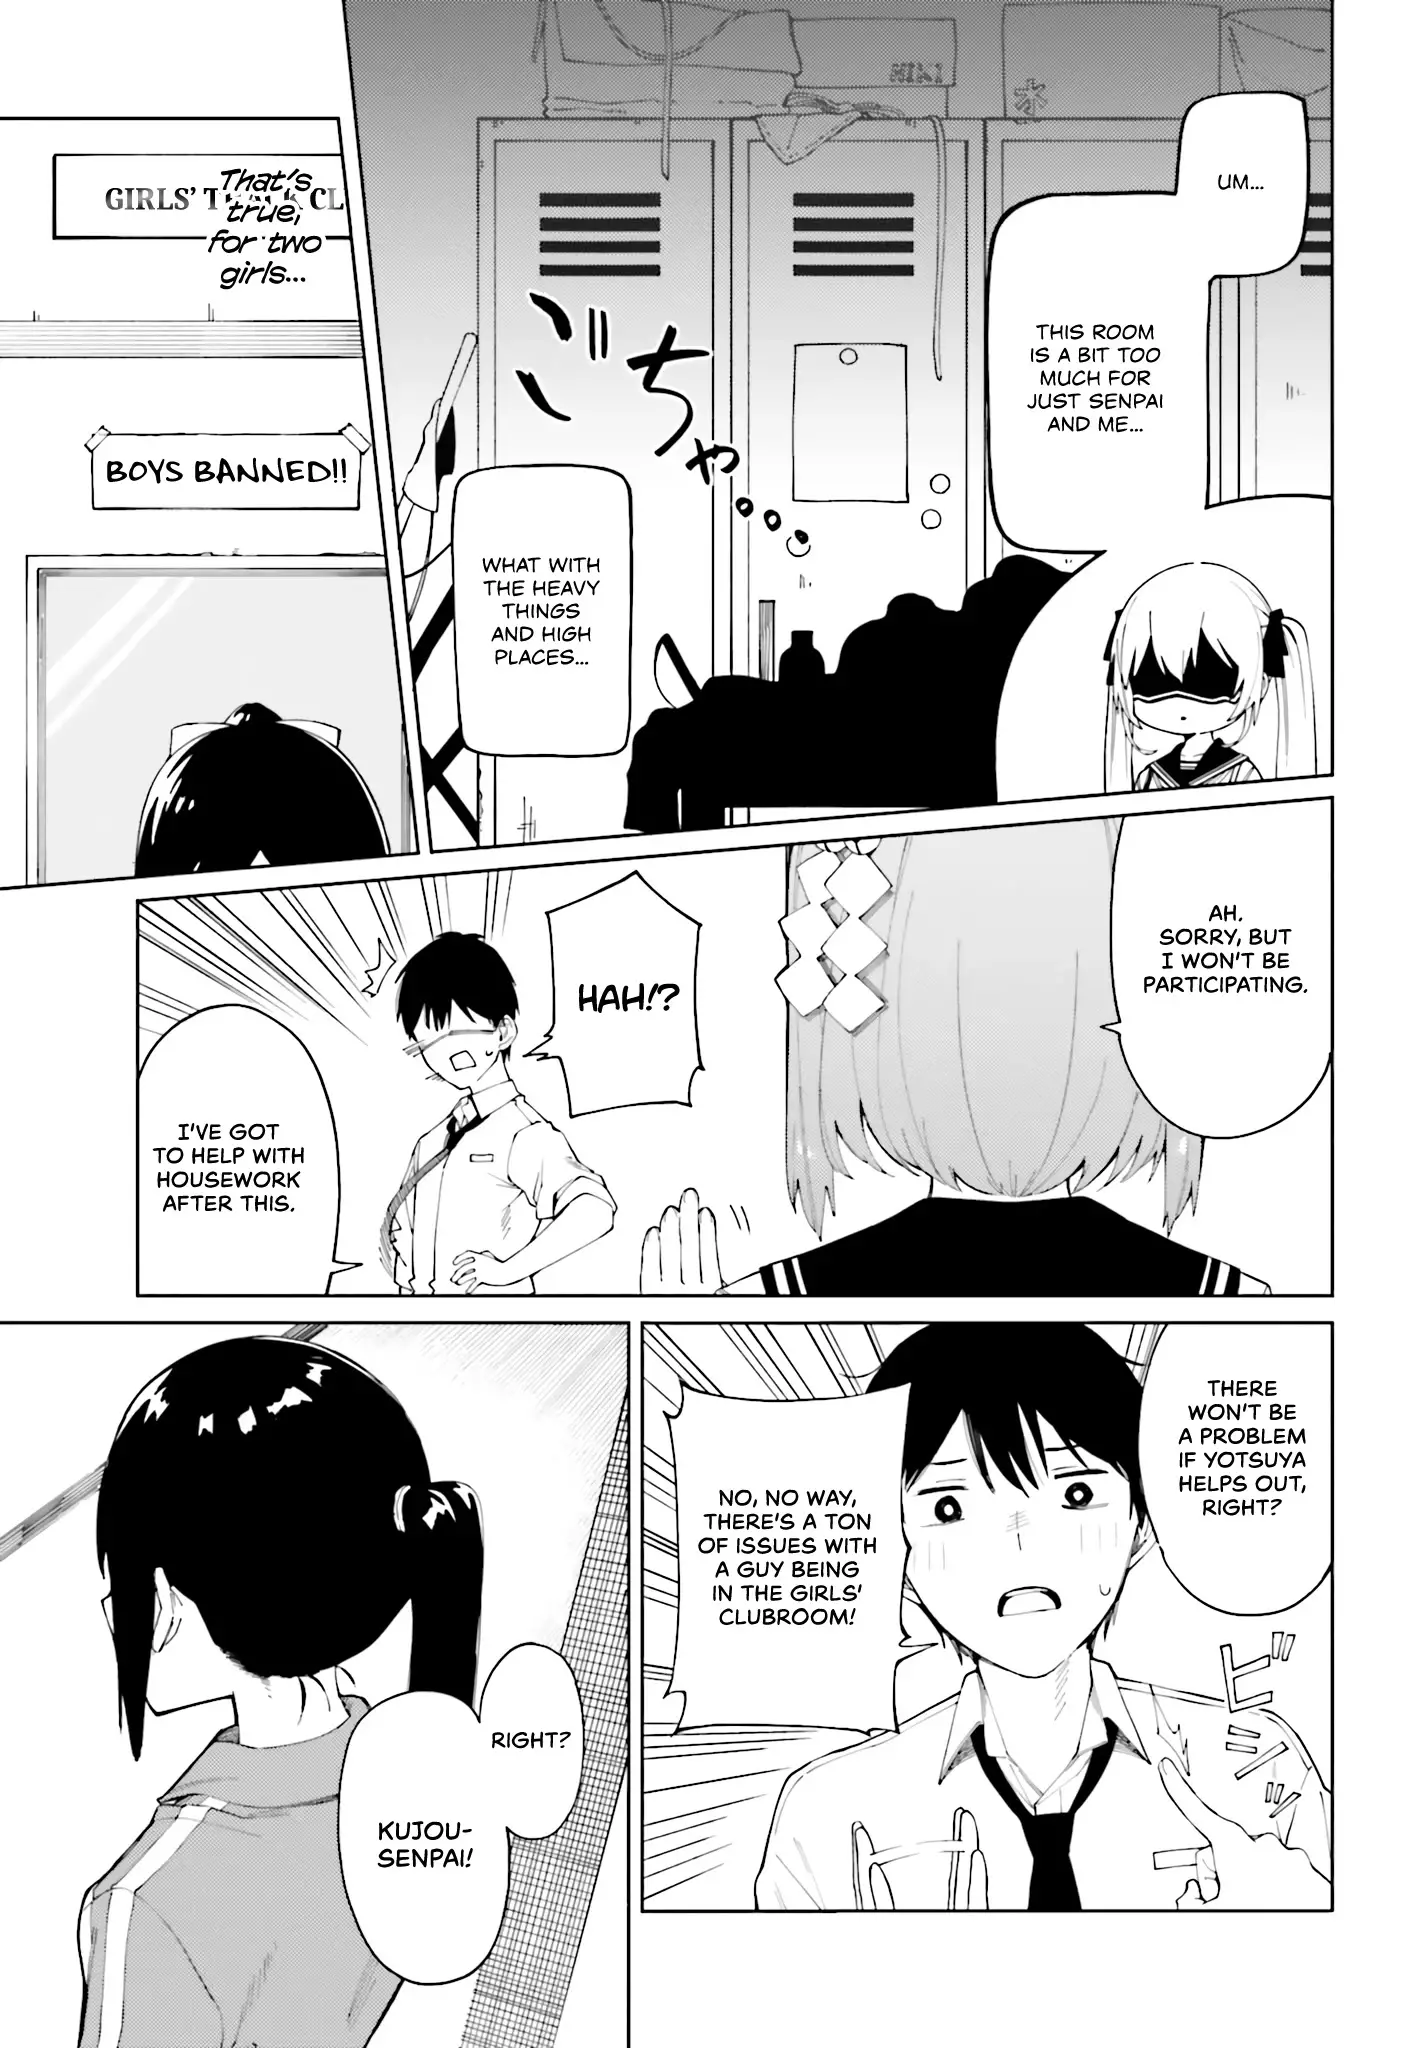 I Don't Understand Shirogane-San's Facial Expression At All - 1 page 14